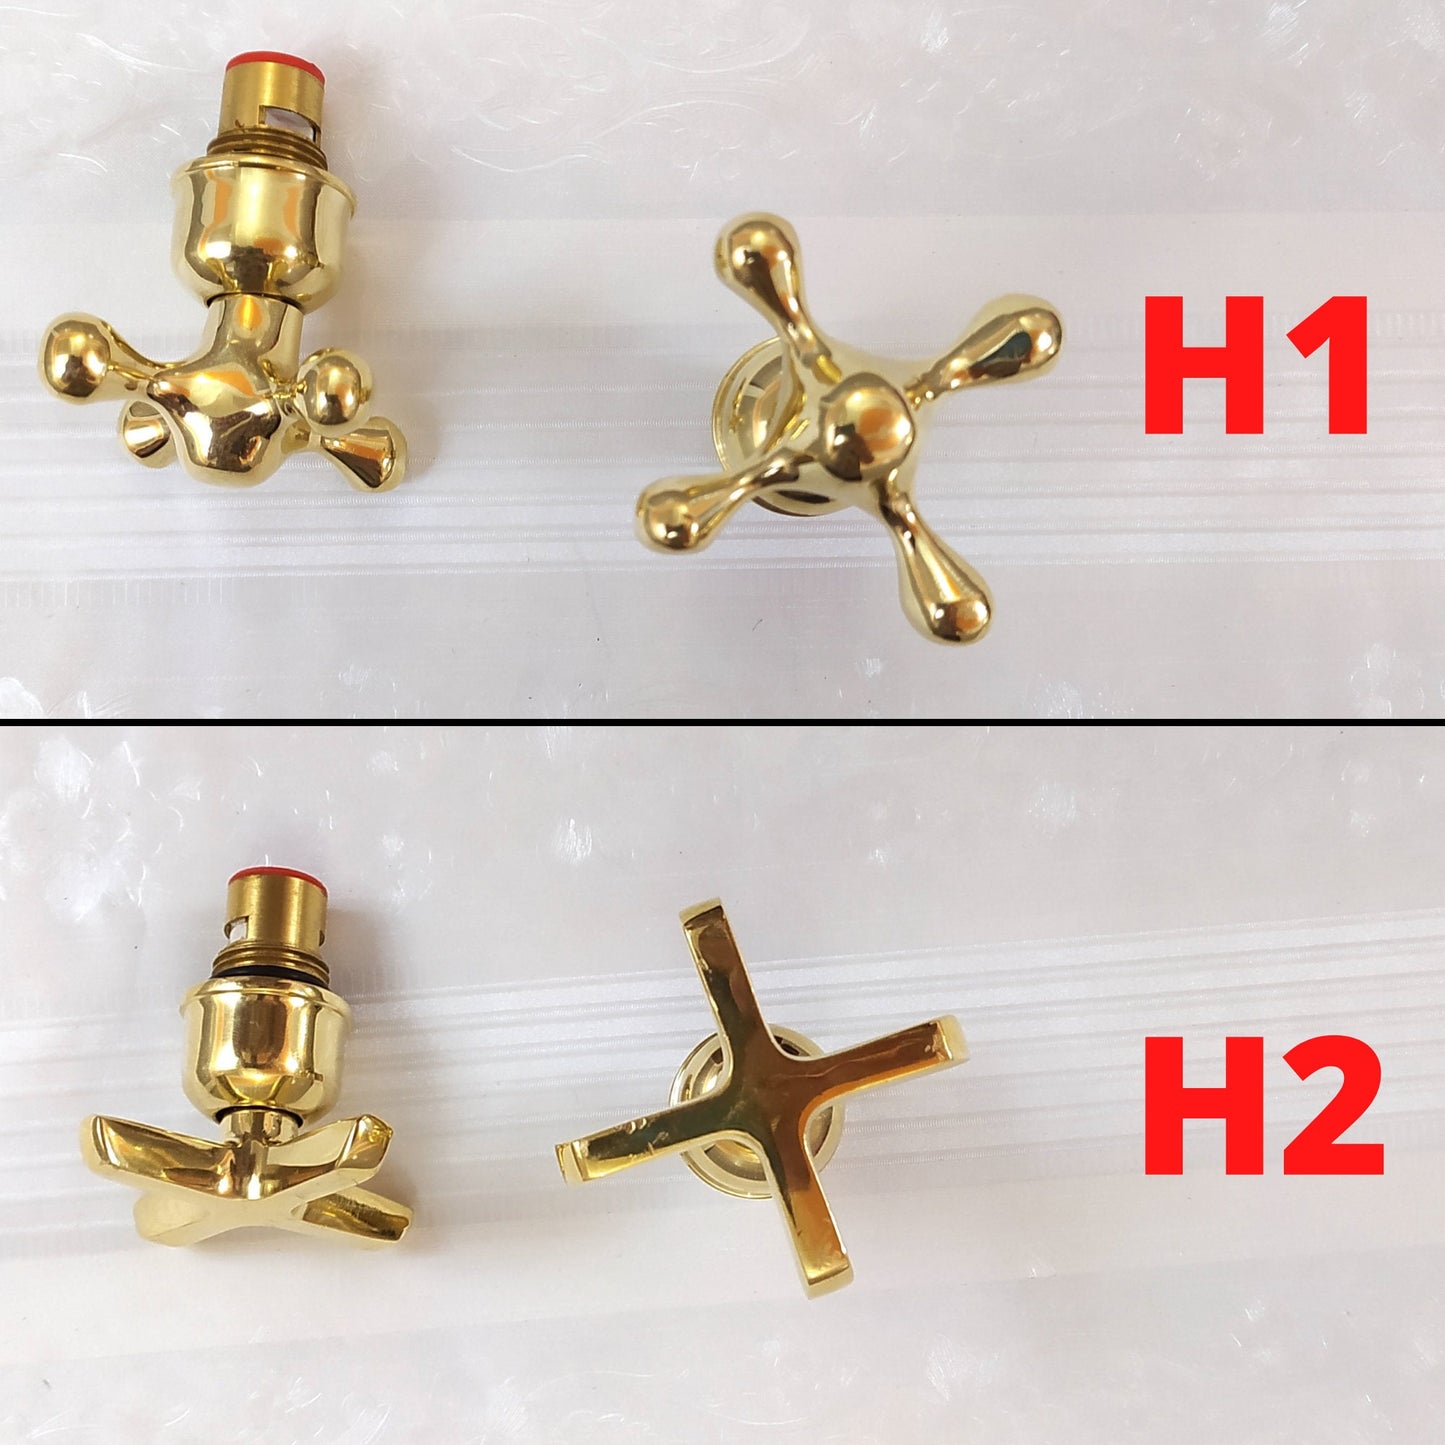 Unlacquered Brass 3 Holes Faucet, Deck Mounted Faucet With Cross Handles